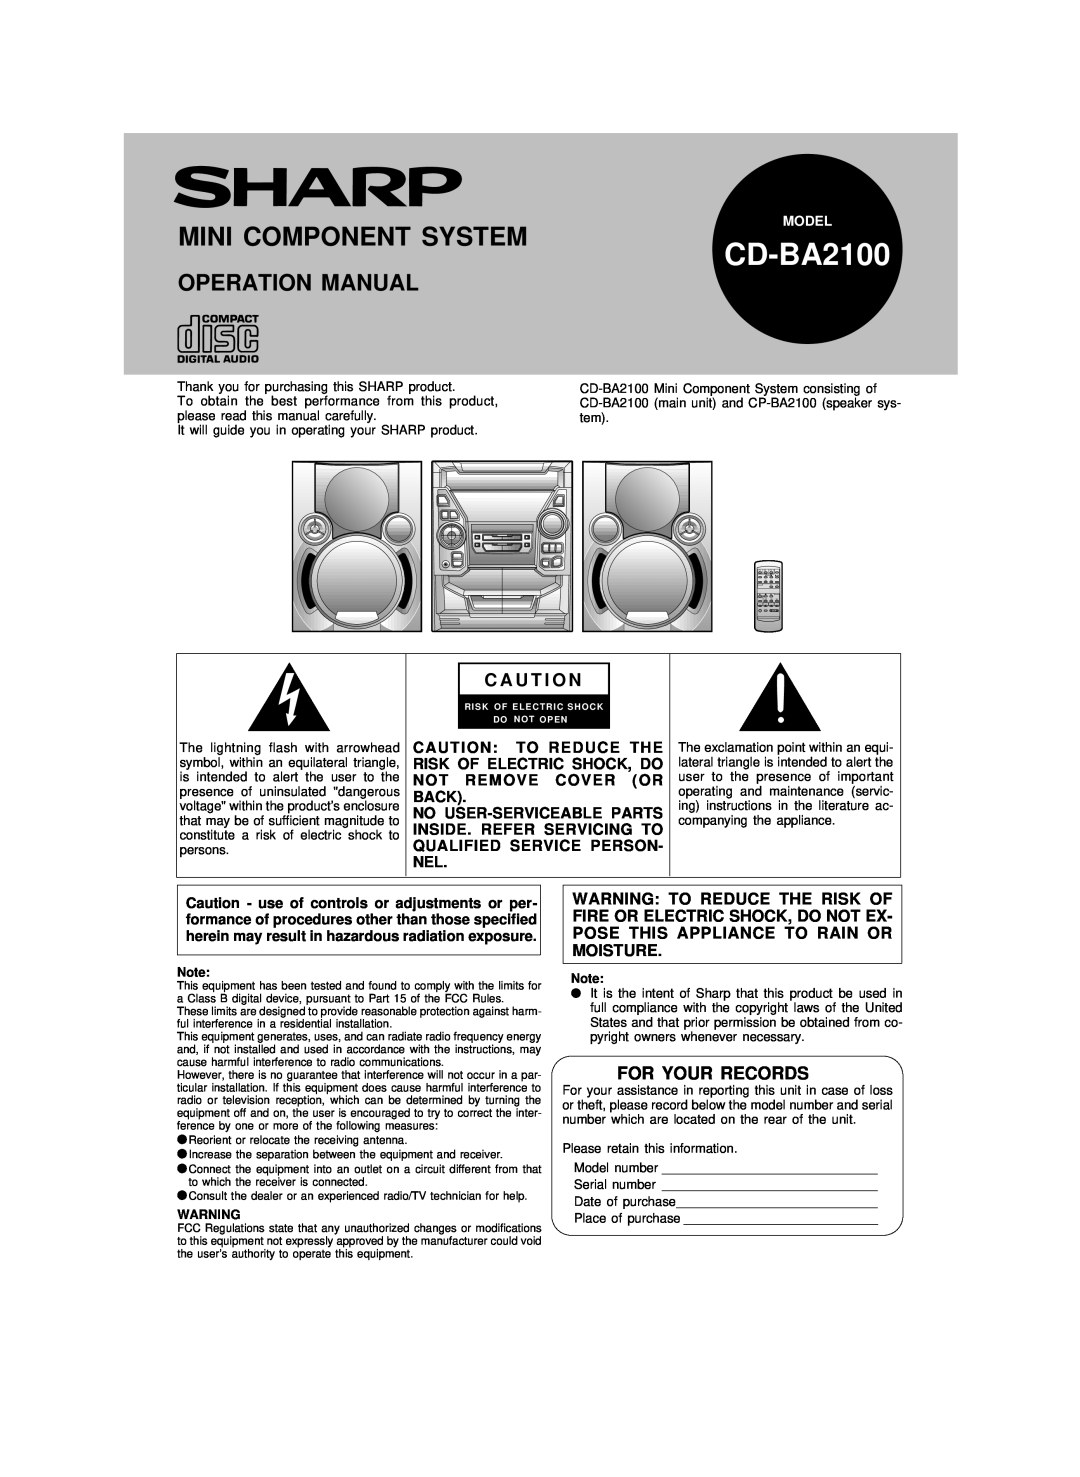 Sharp CD-BA2100 operation manual Mini Component System, C A U T I O N, For Your Records 